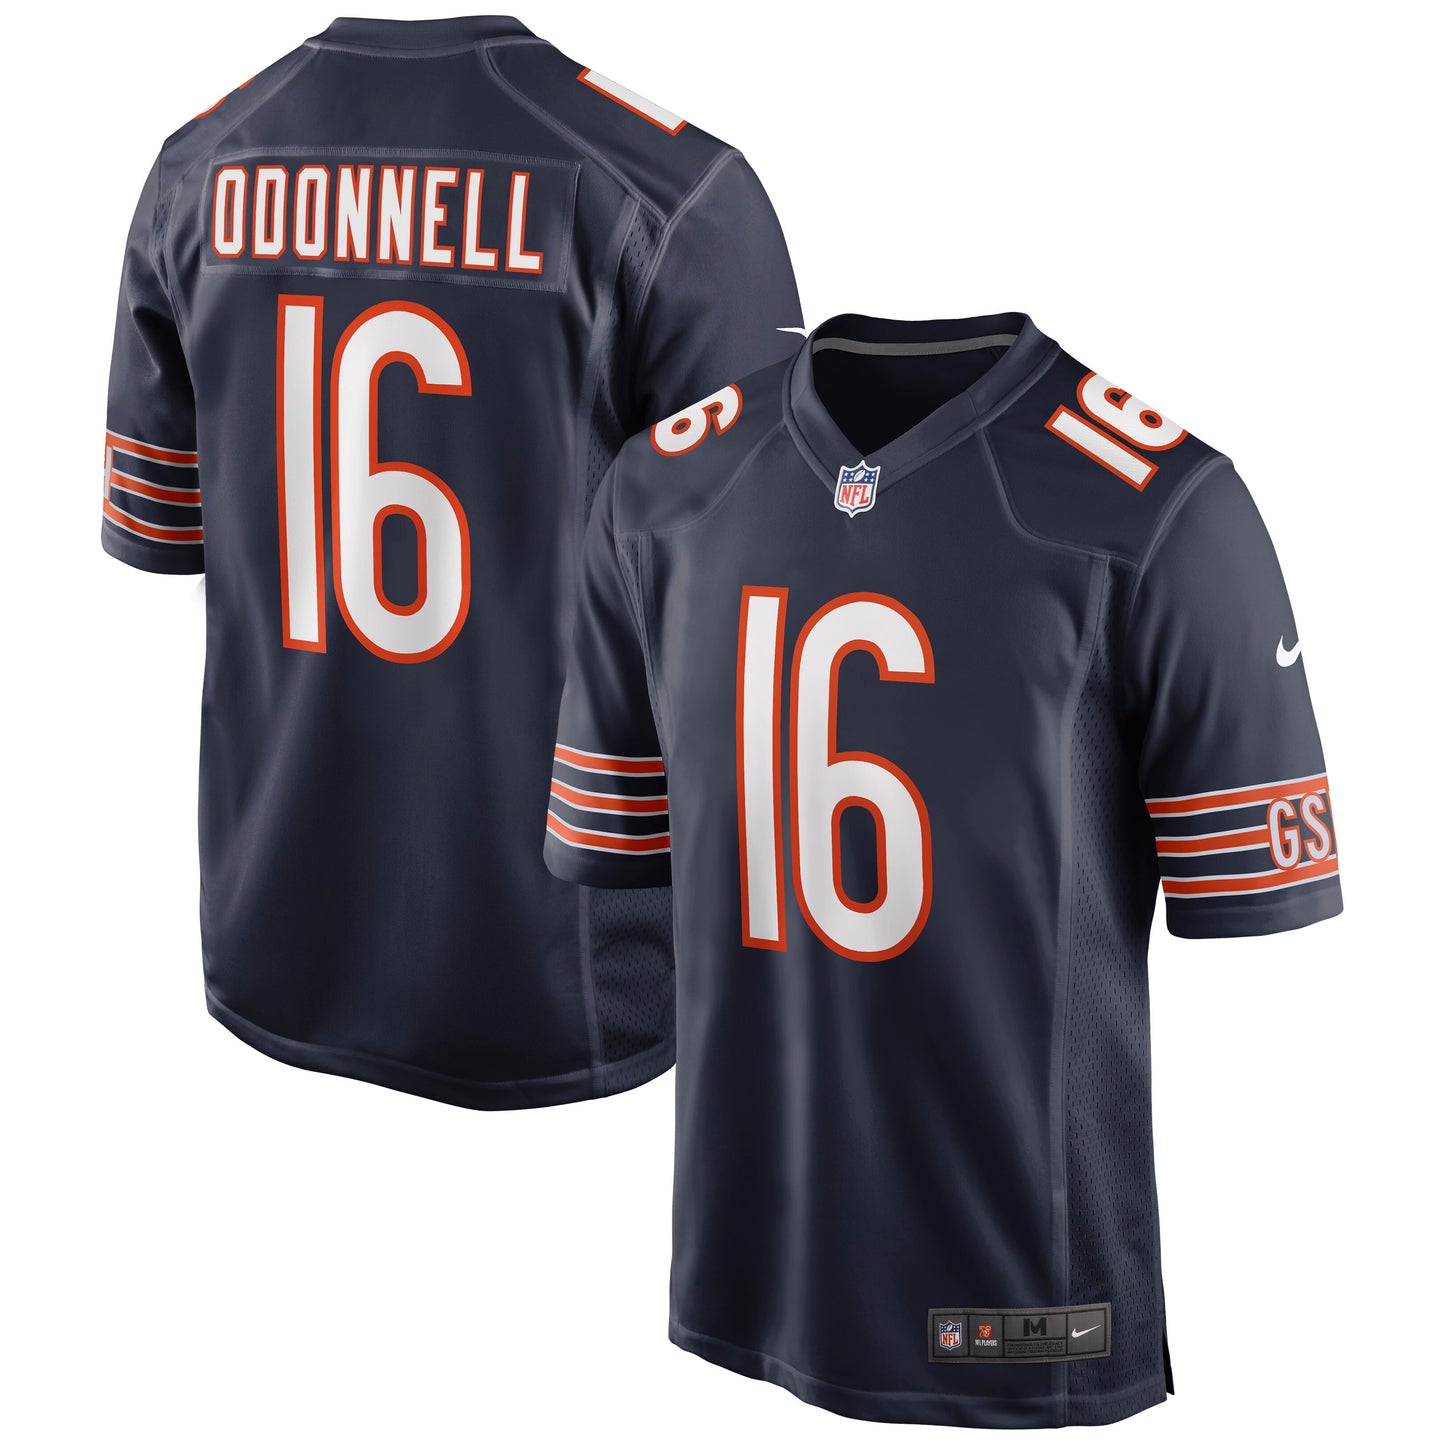 Pat O'Donnell Chicago Bears Nike Game Jersey - Navy